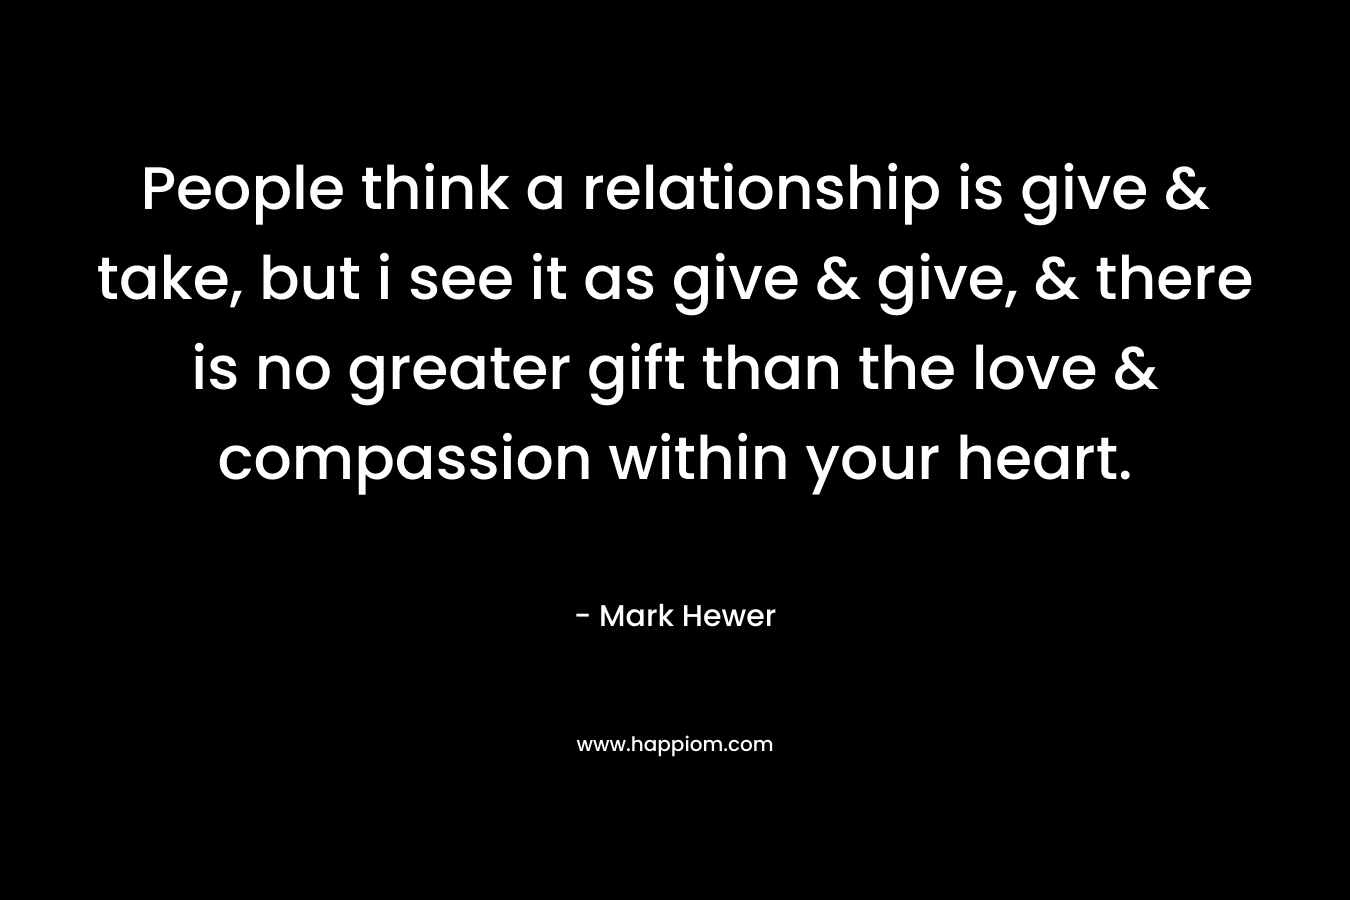 People think a relationship is give & take, but i see it as give & give, & there is no greater gift than the love & compassion within your heart.